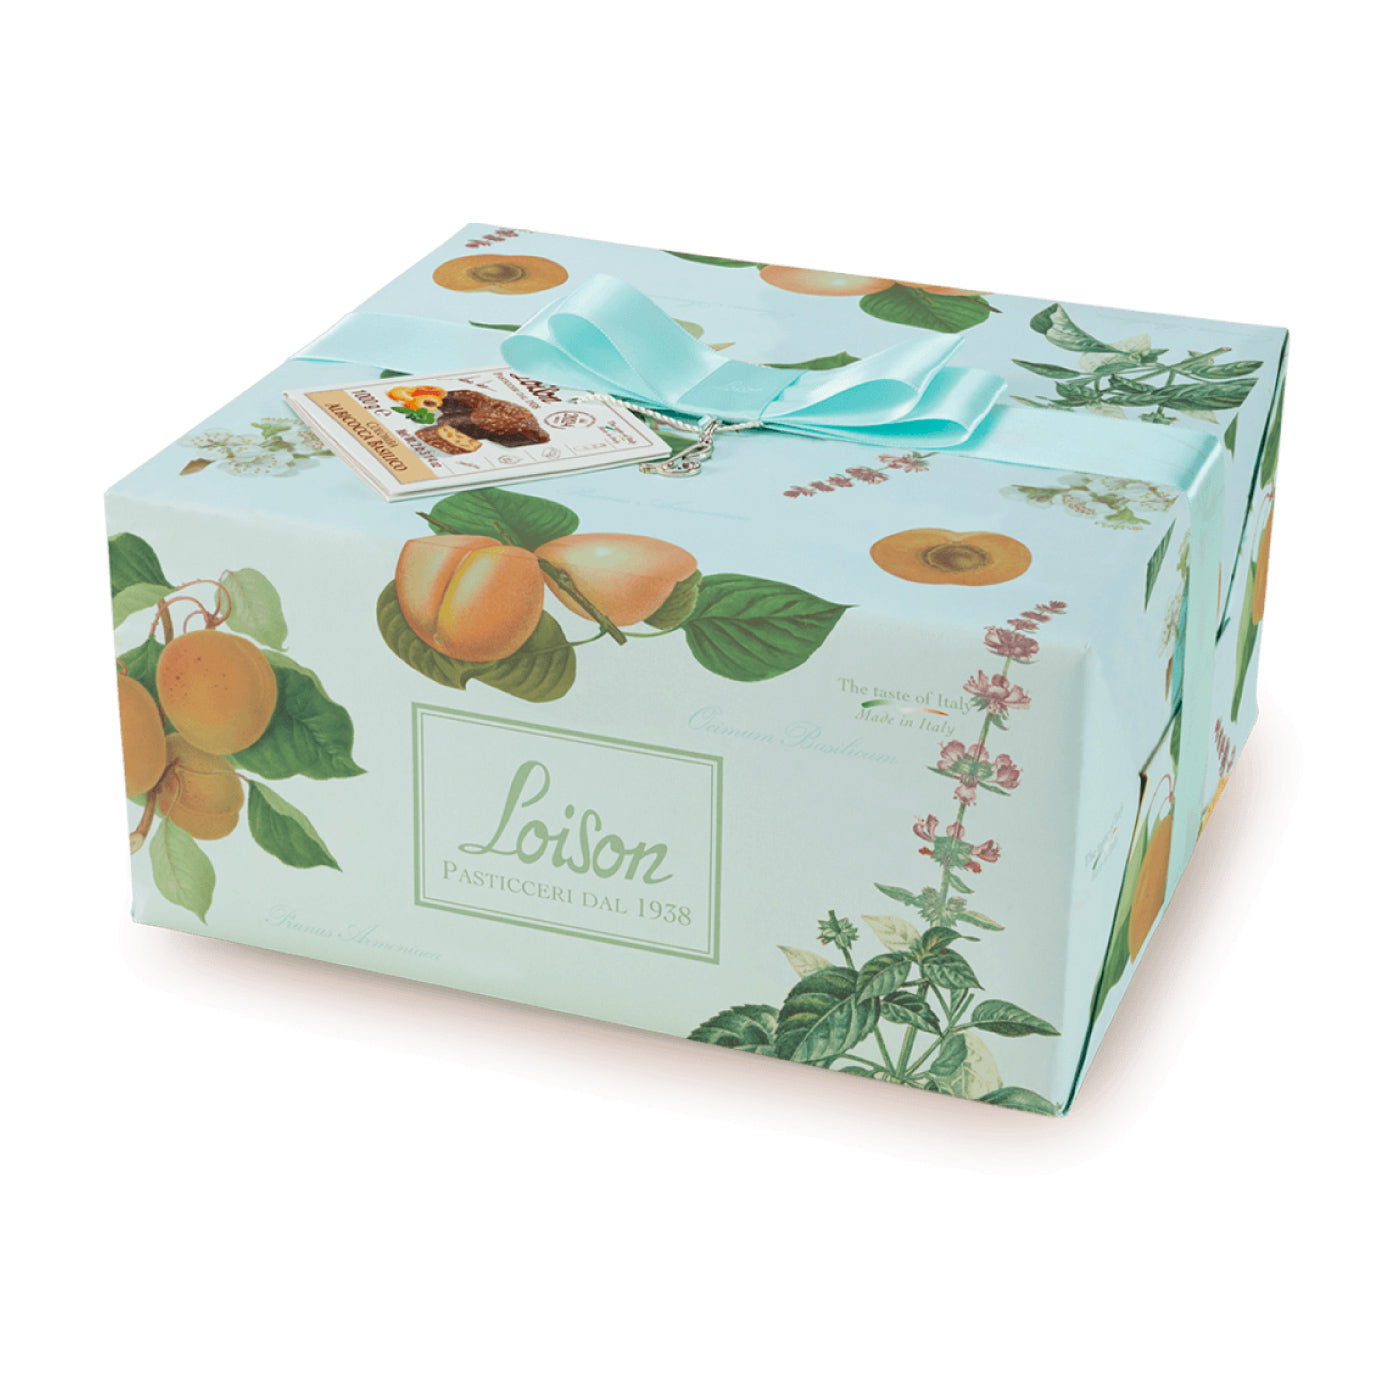 Colomba Apricot and Basil Loison